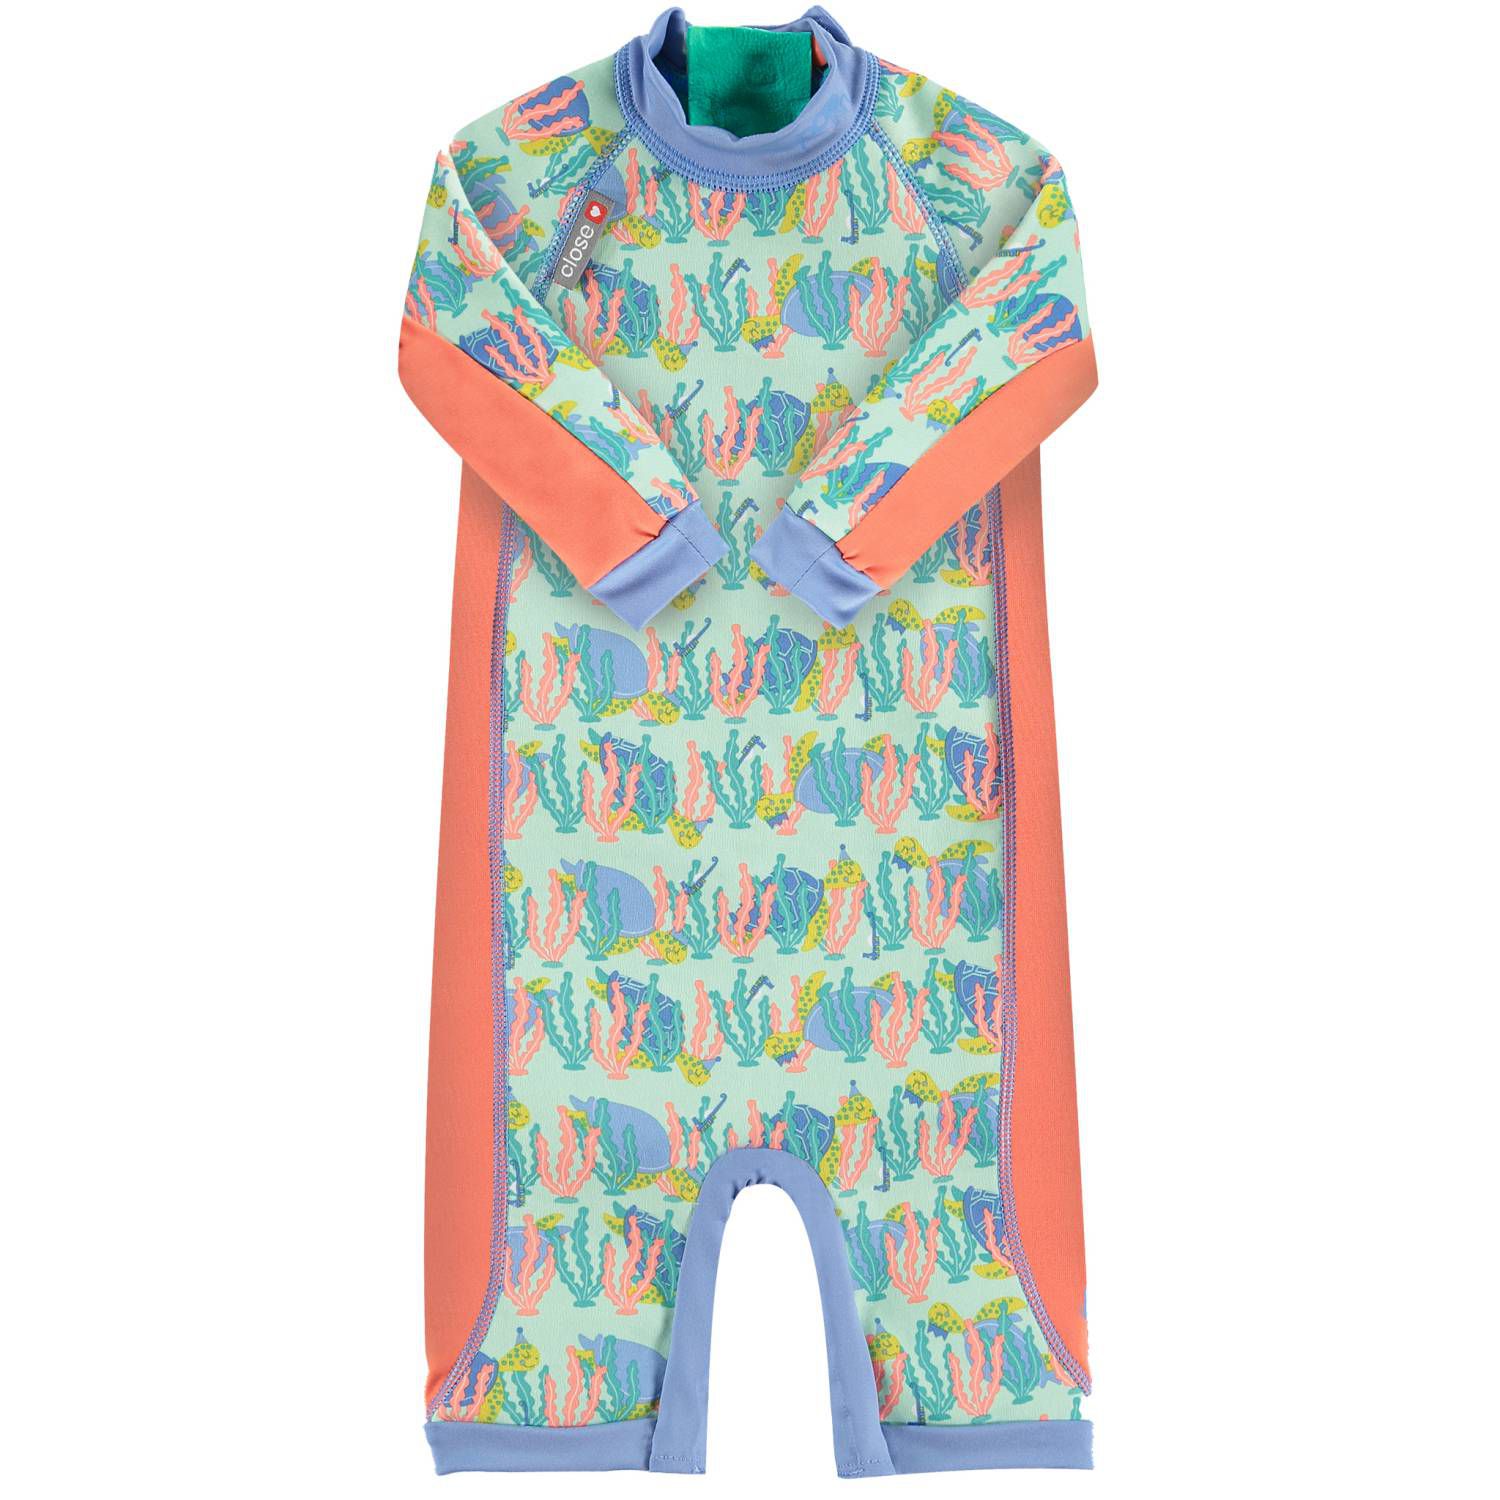 Pop-in Toddler Swim Suit - 2019/20 collections